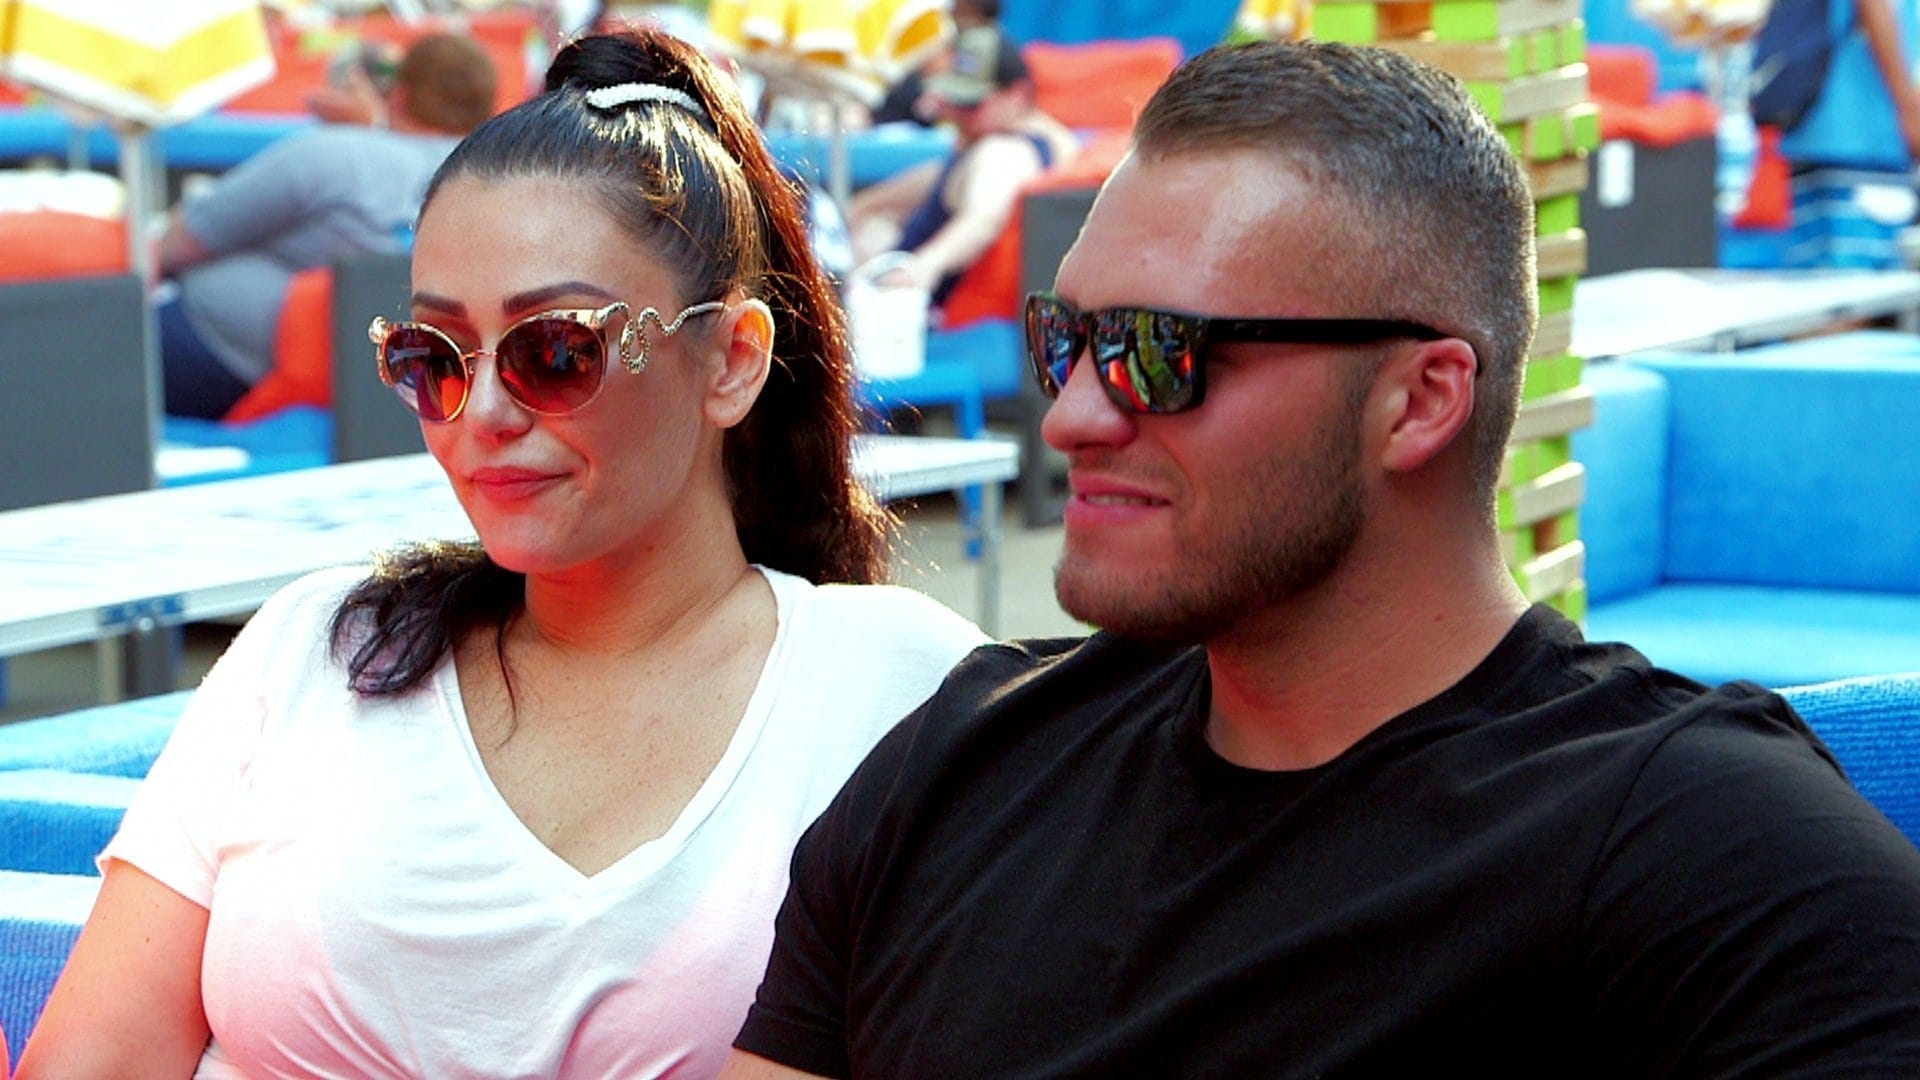 watch jersey shore family vacation season 3 episode 1 online